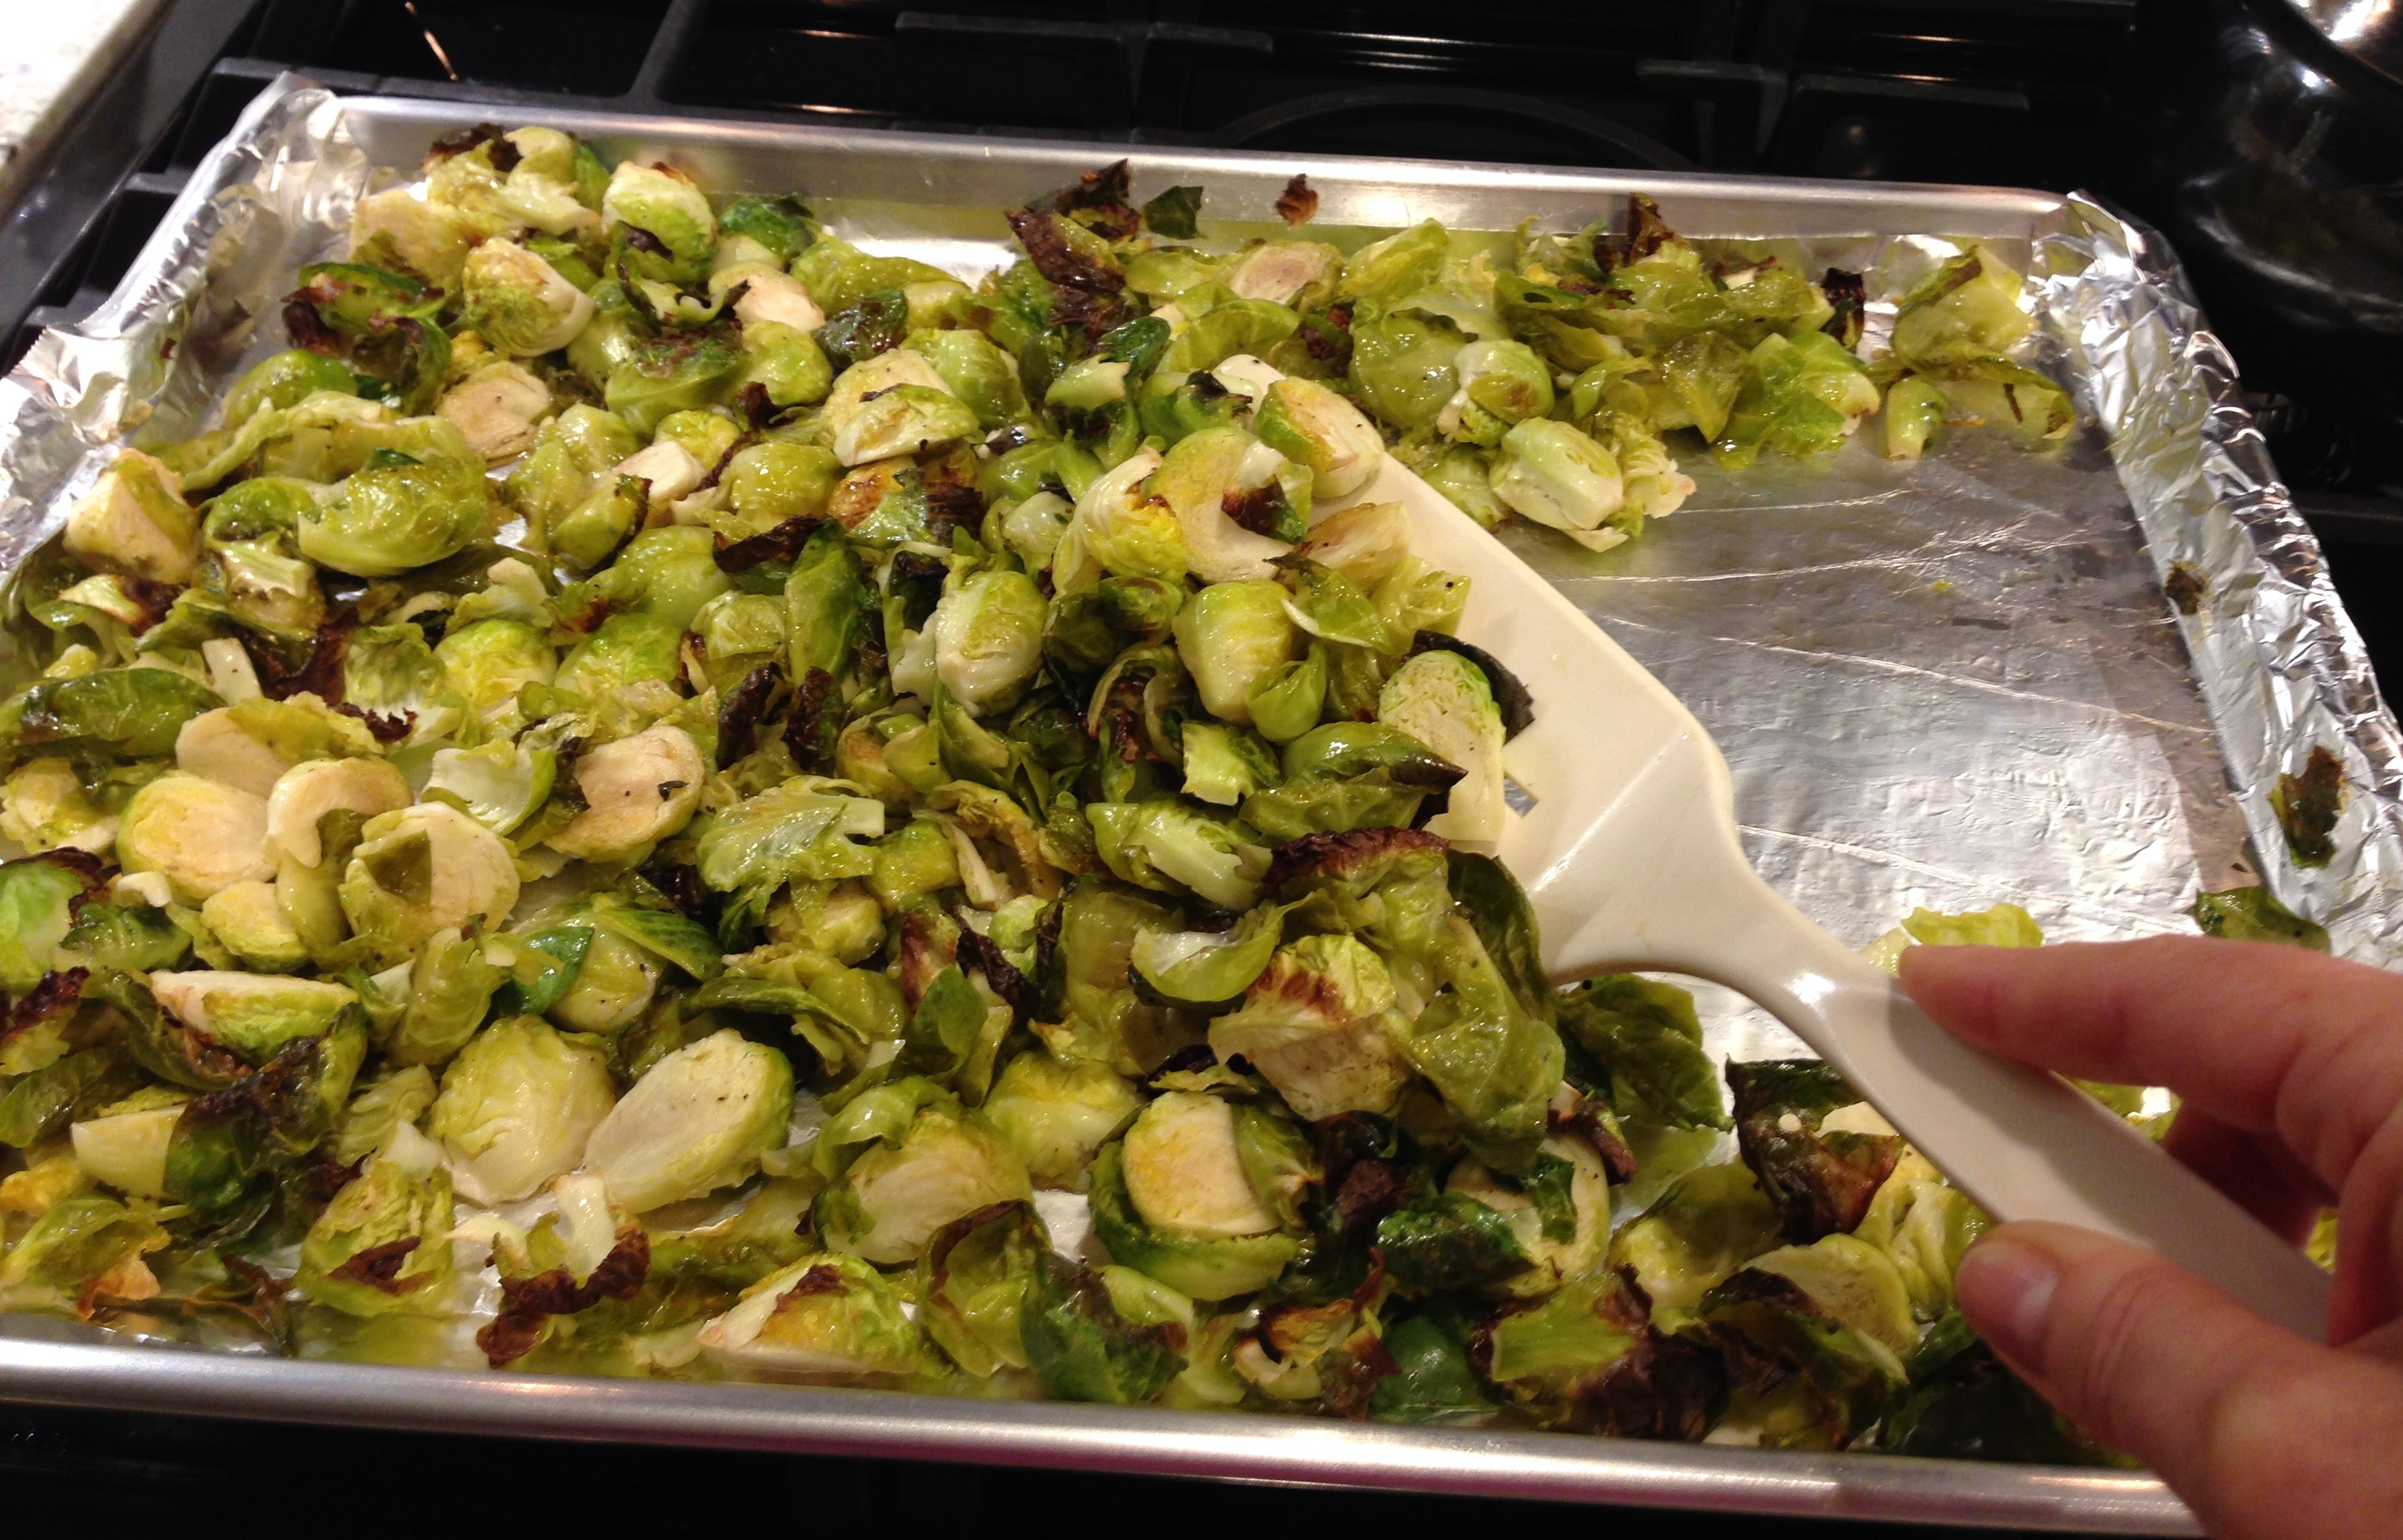 Stir the Brussels sprouts